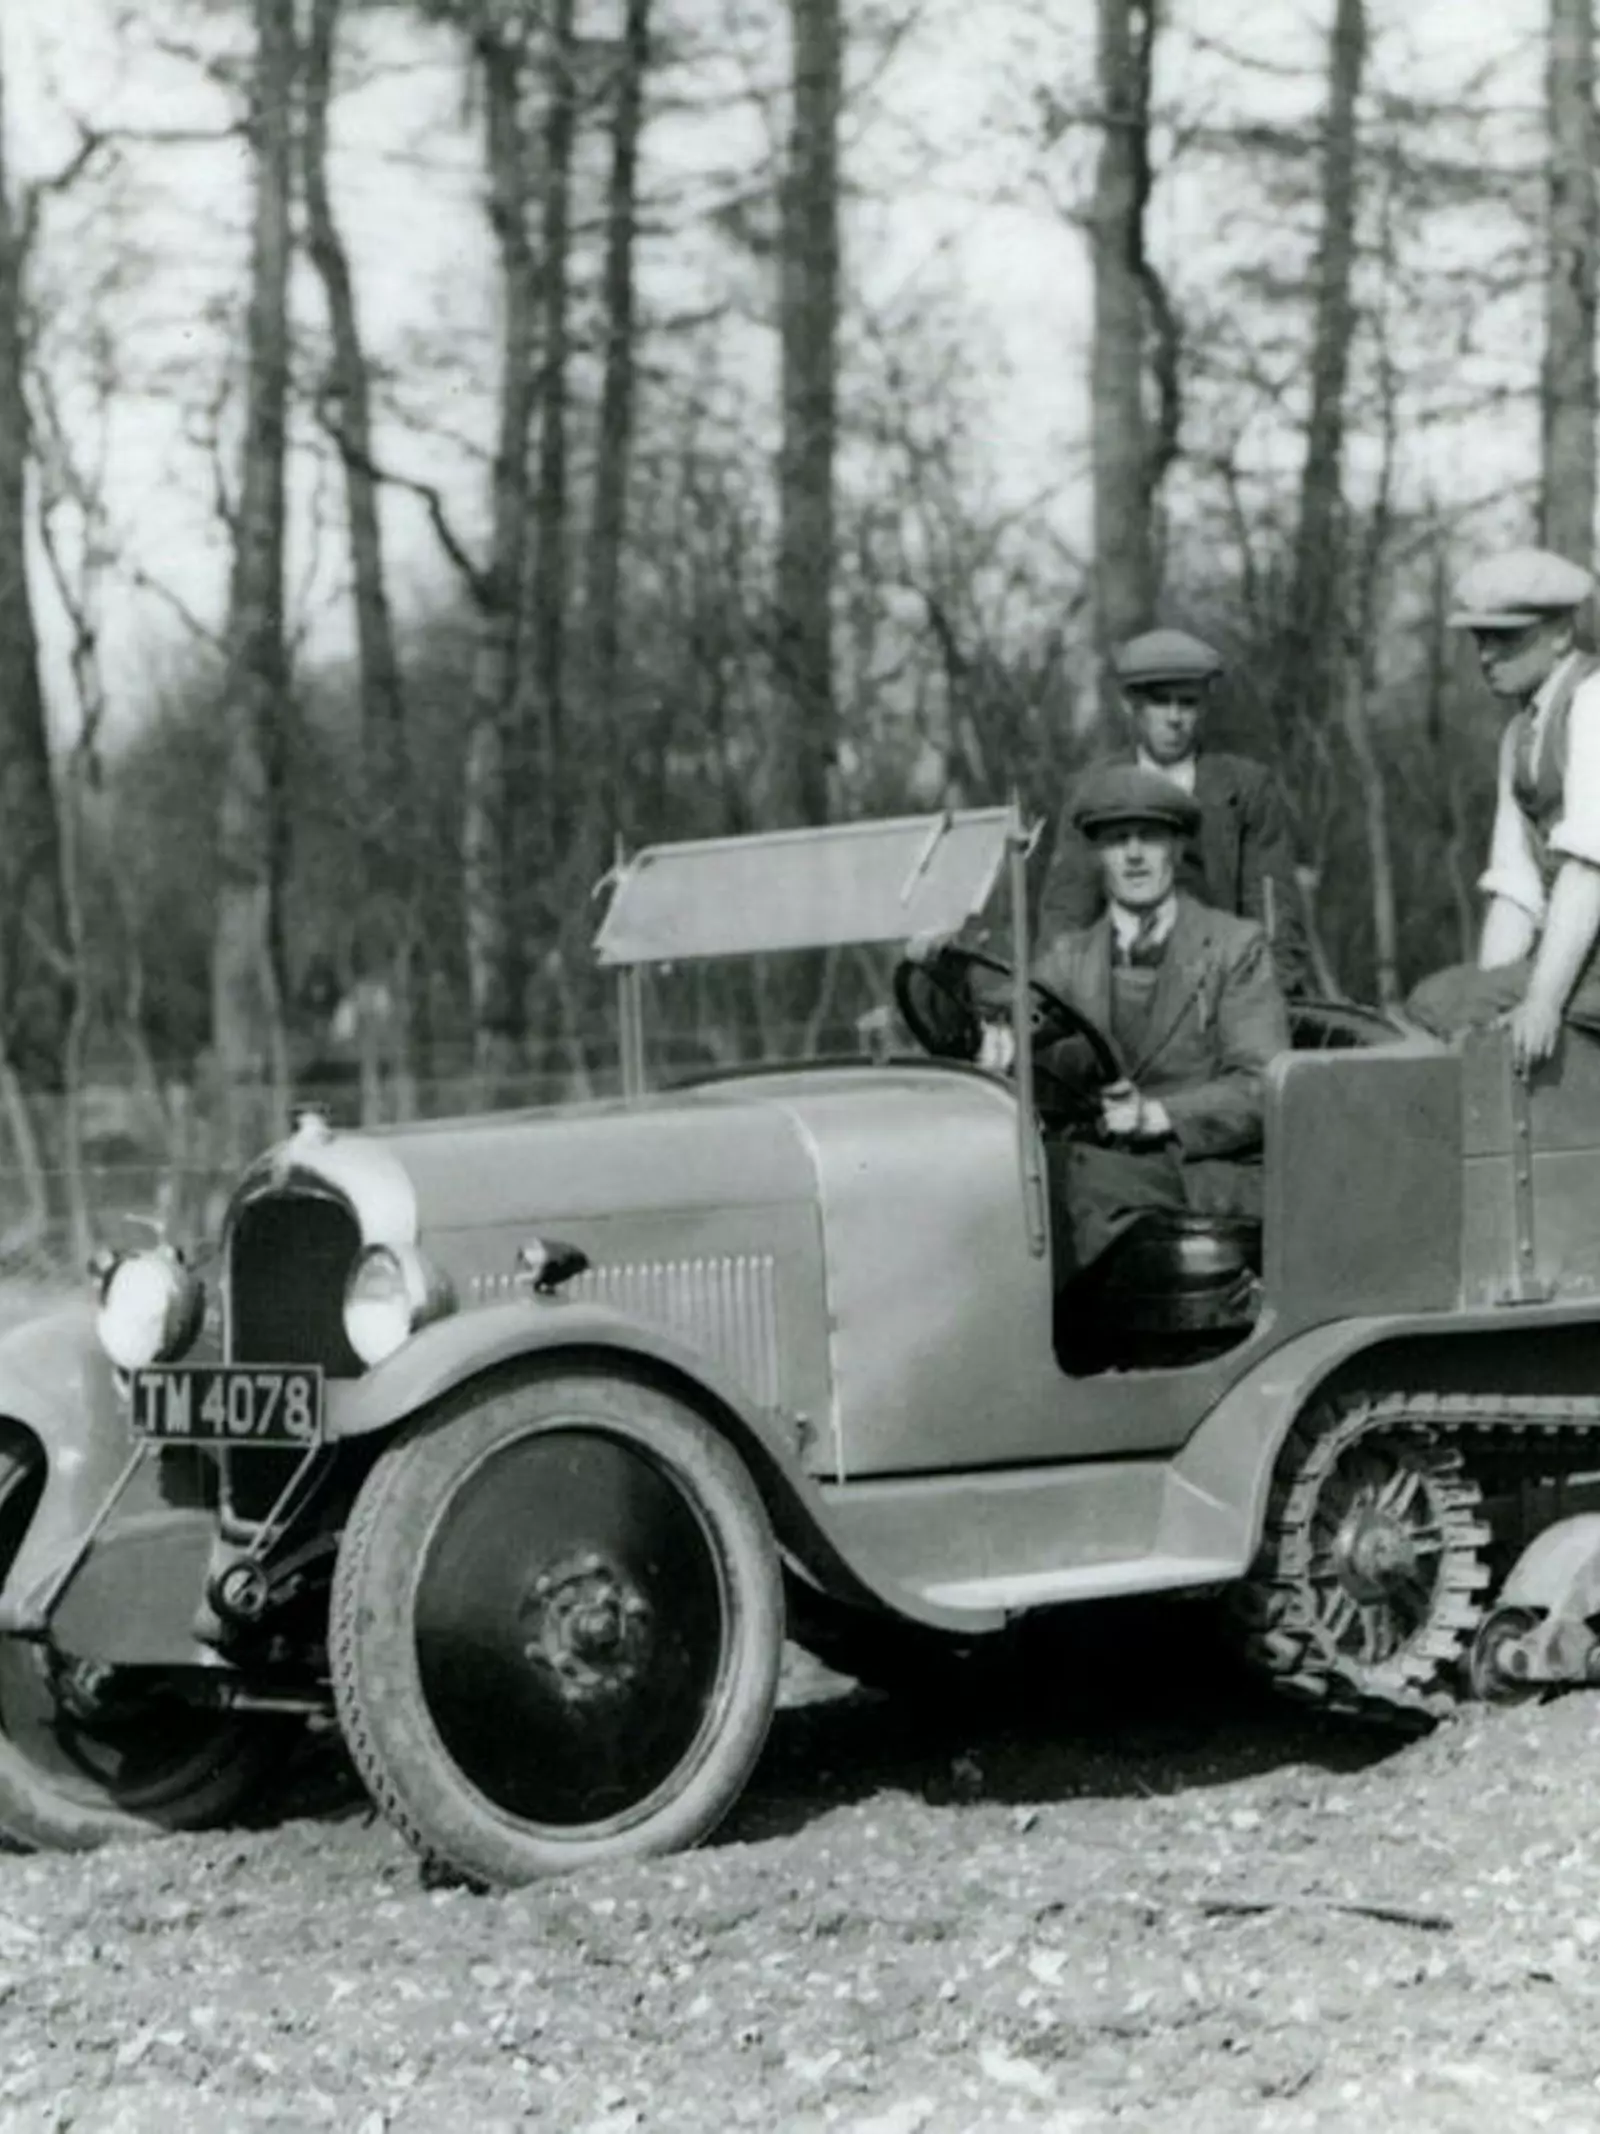 A Citroen half-tracked vehical being driven down a slope at Whipsnade in 1929. The driver as accompanied by two other men. There is woodland in the background. 